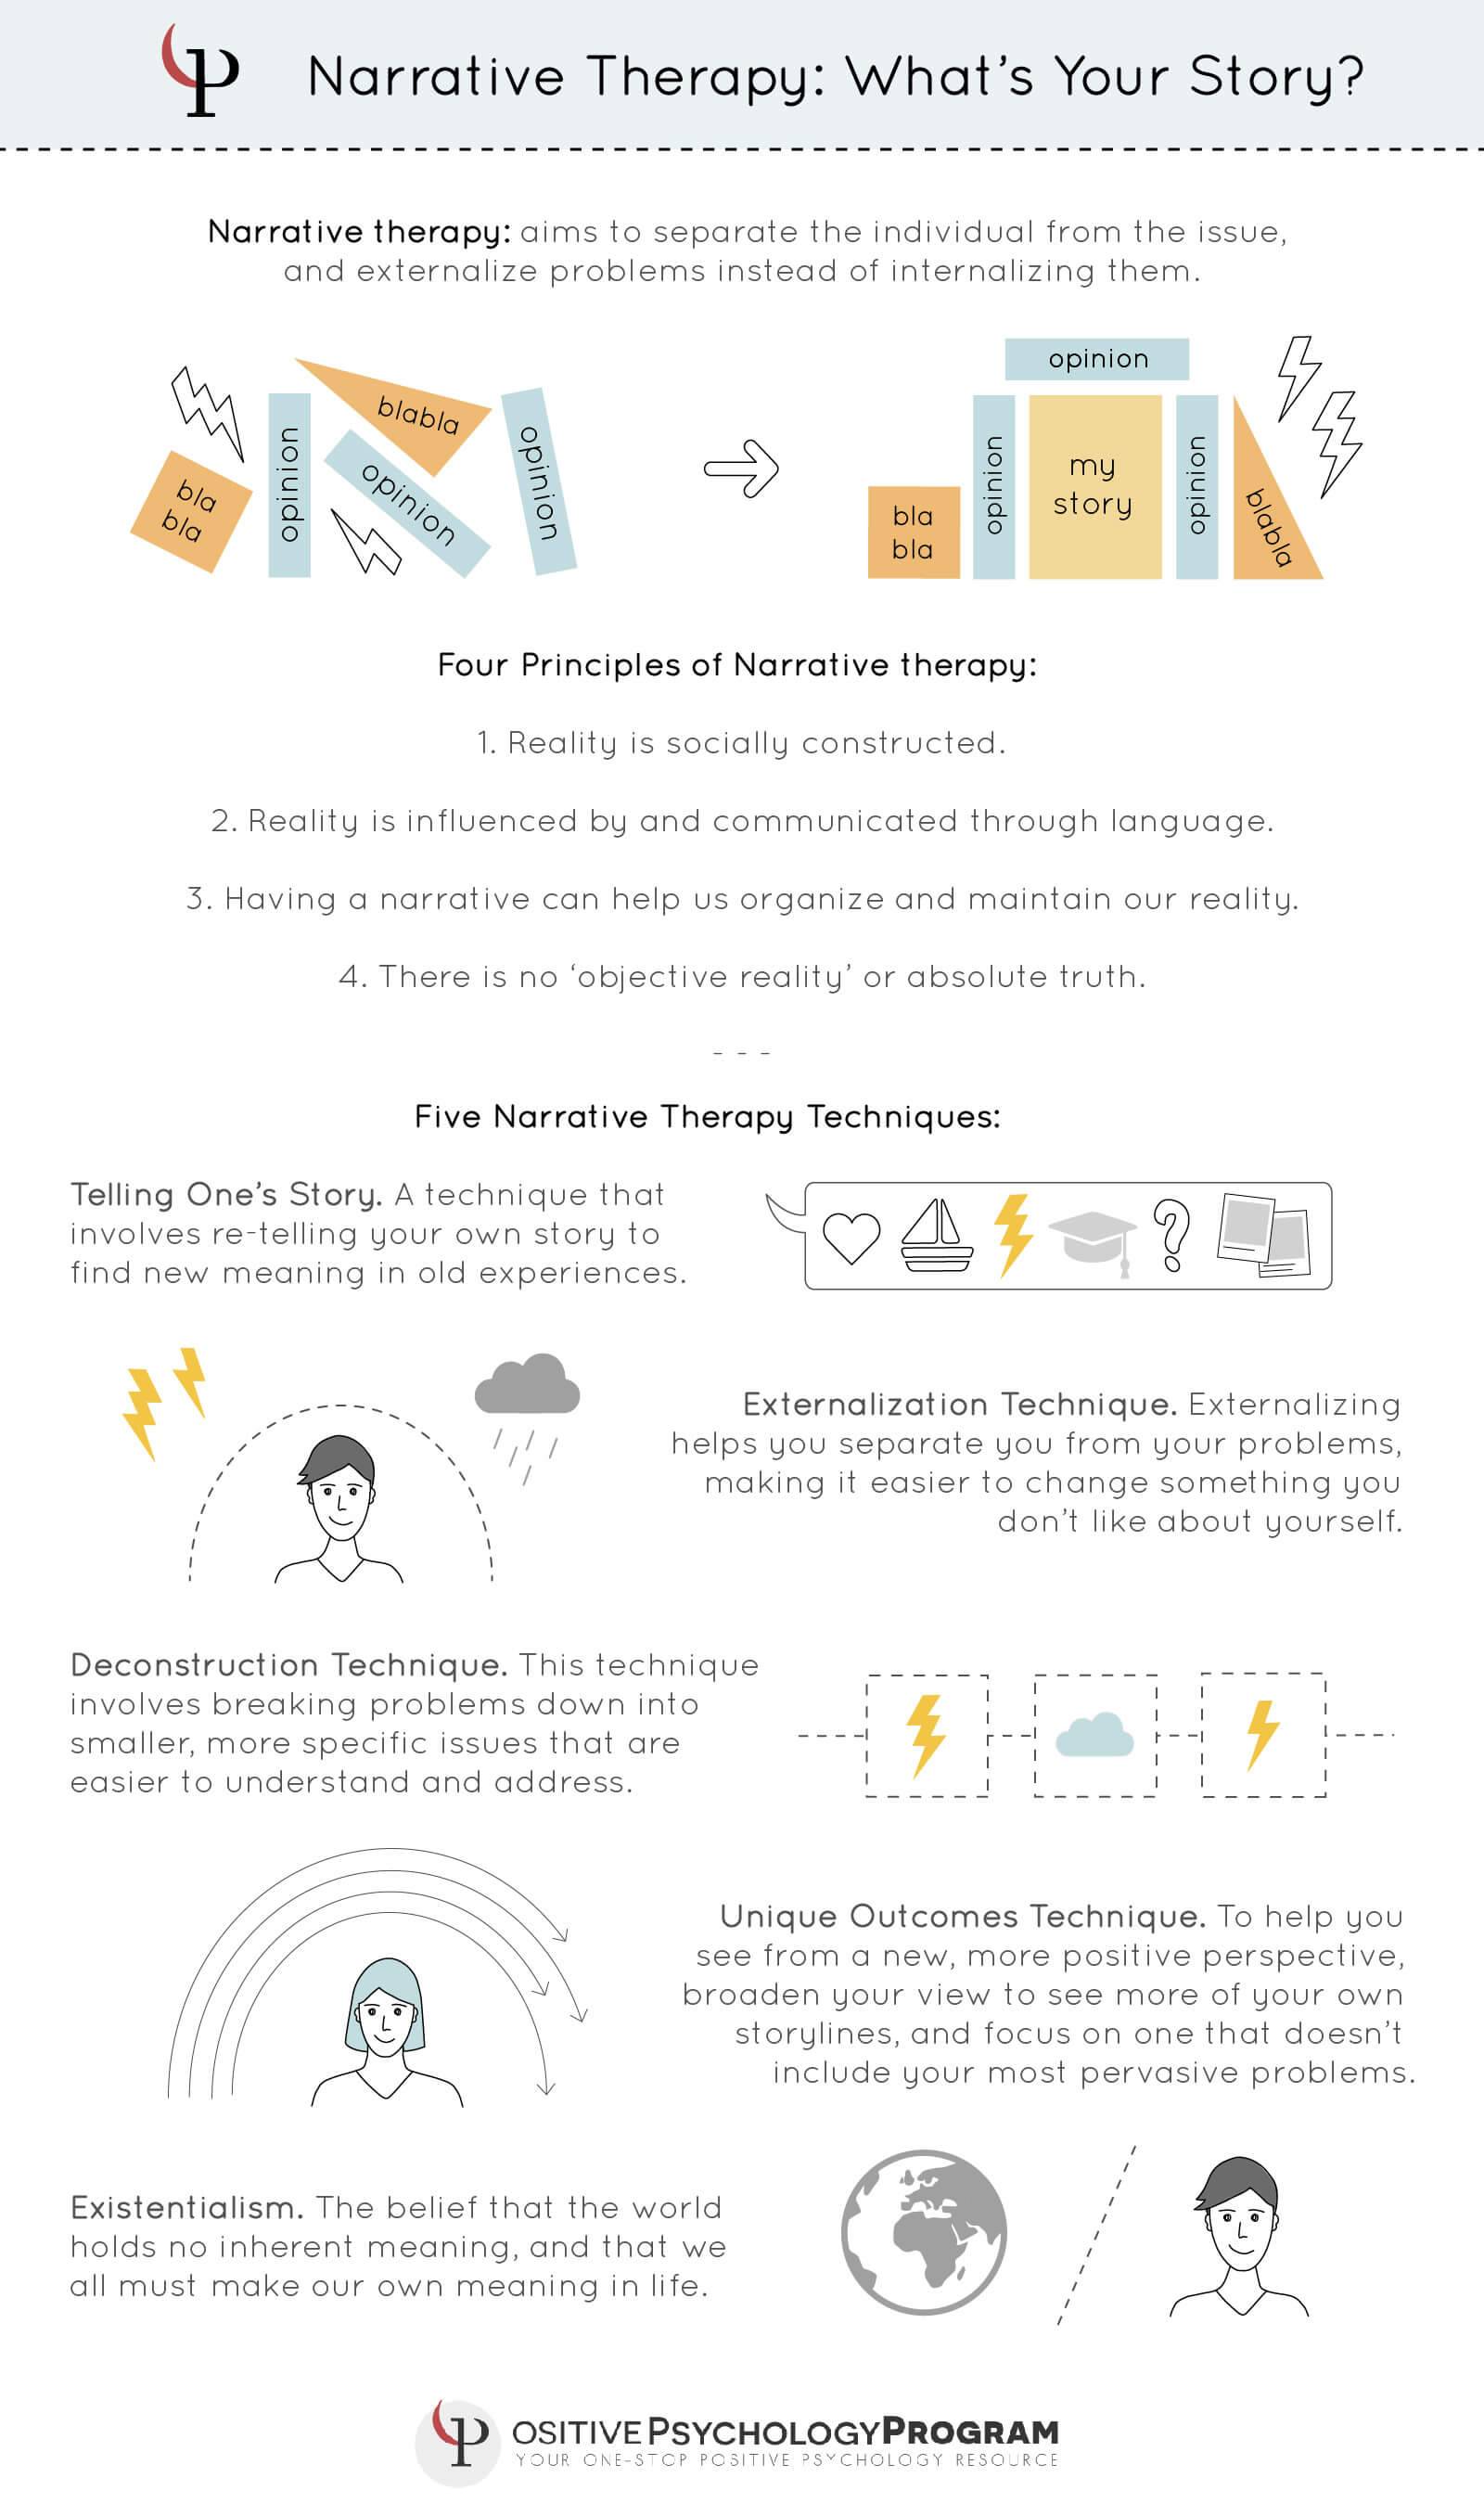 narrative therapy What's your story? infographic